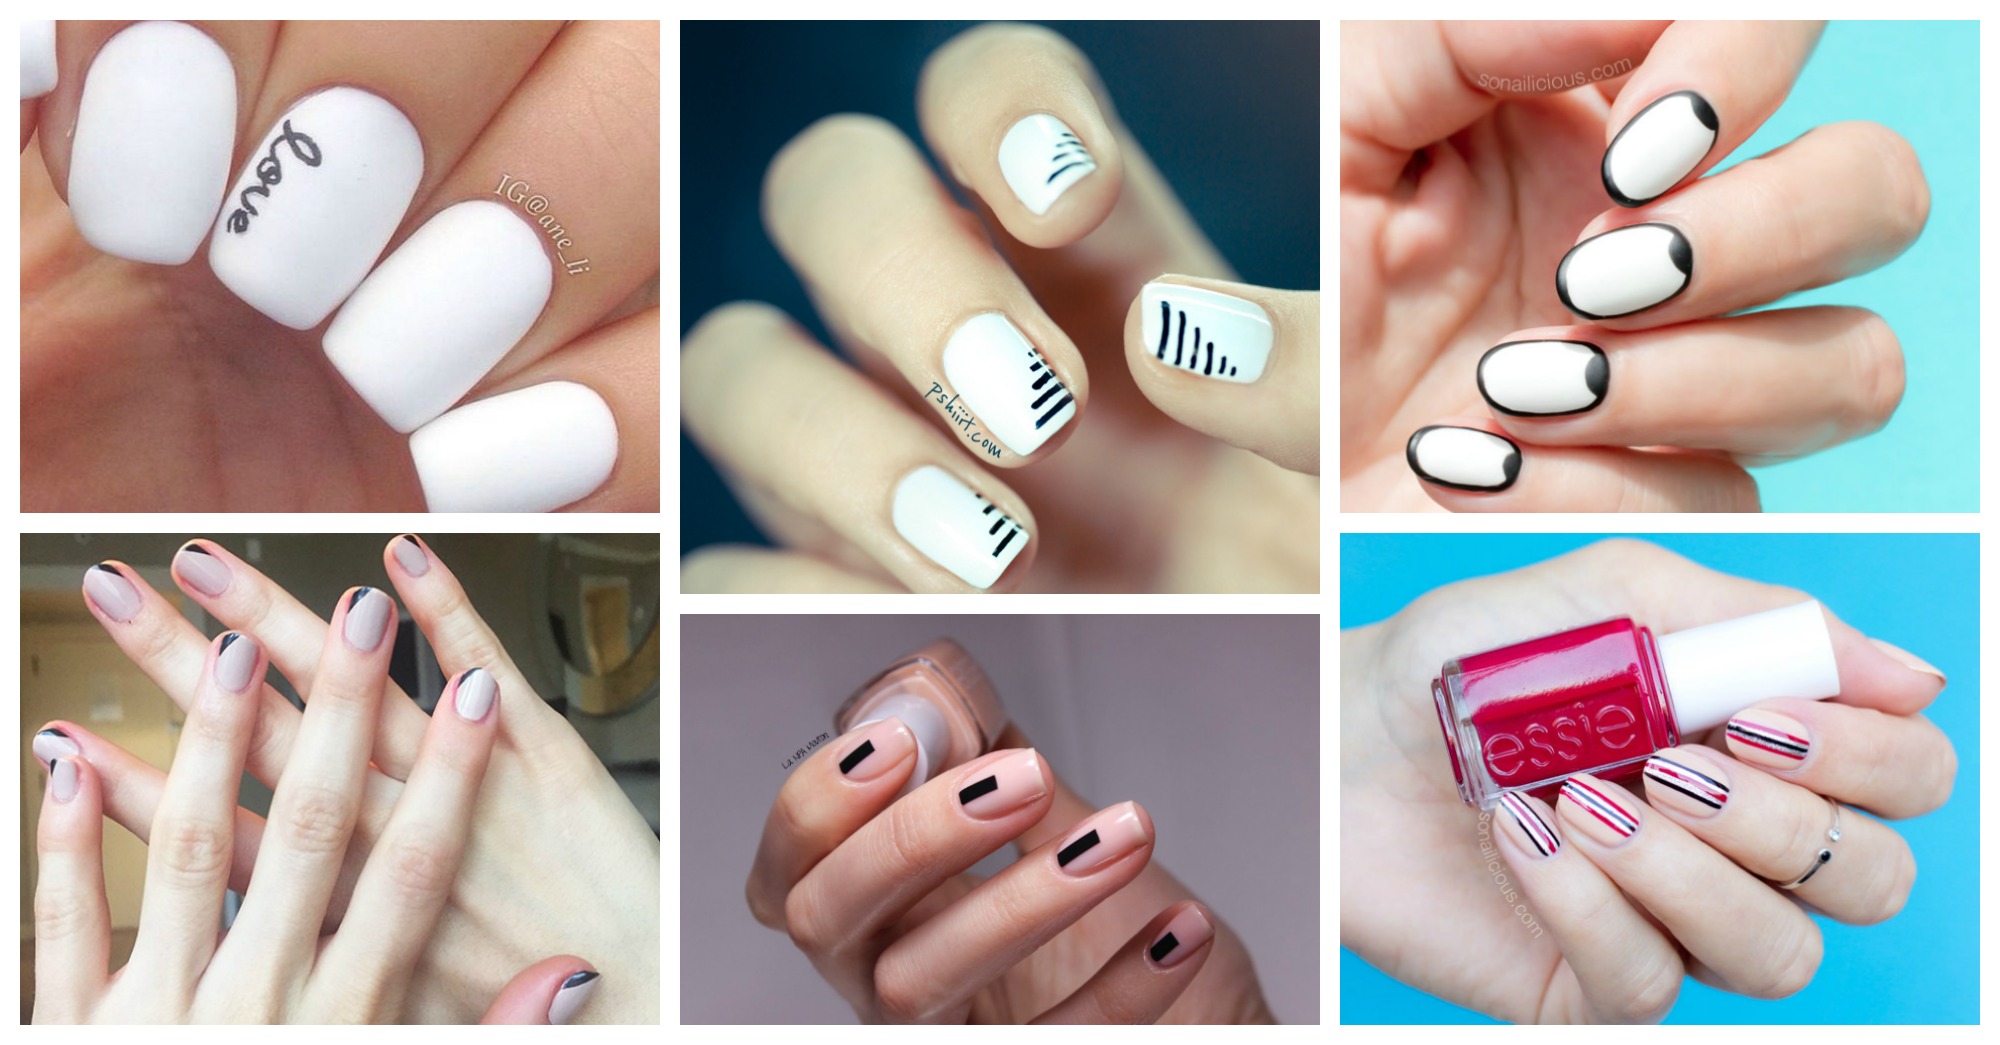 4. Minimalist Nail Designs for Effortless Style - wide 3